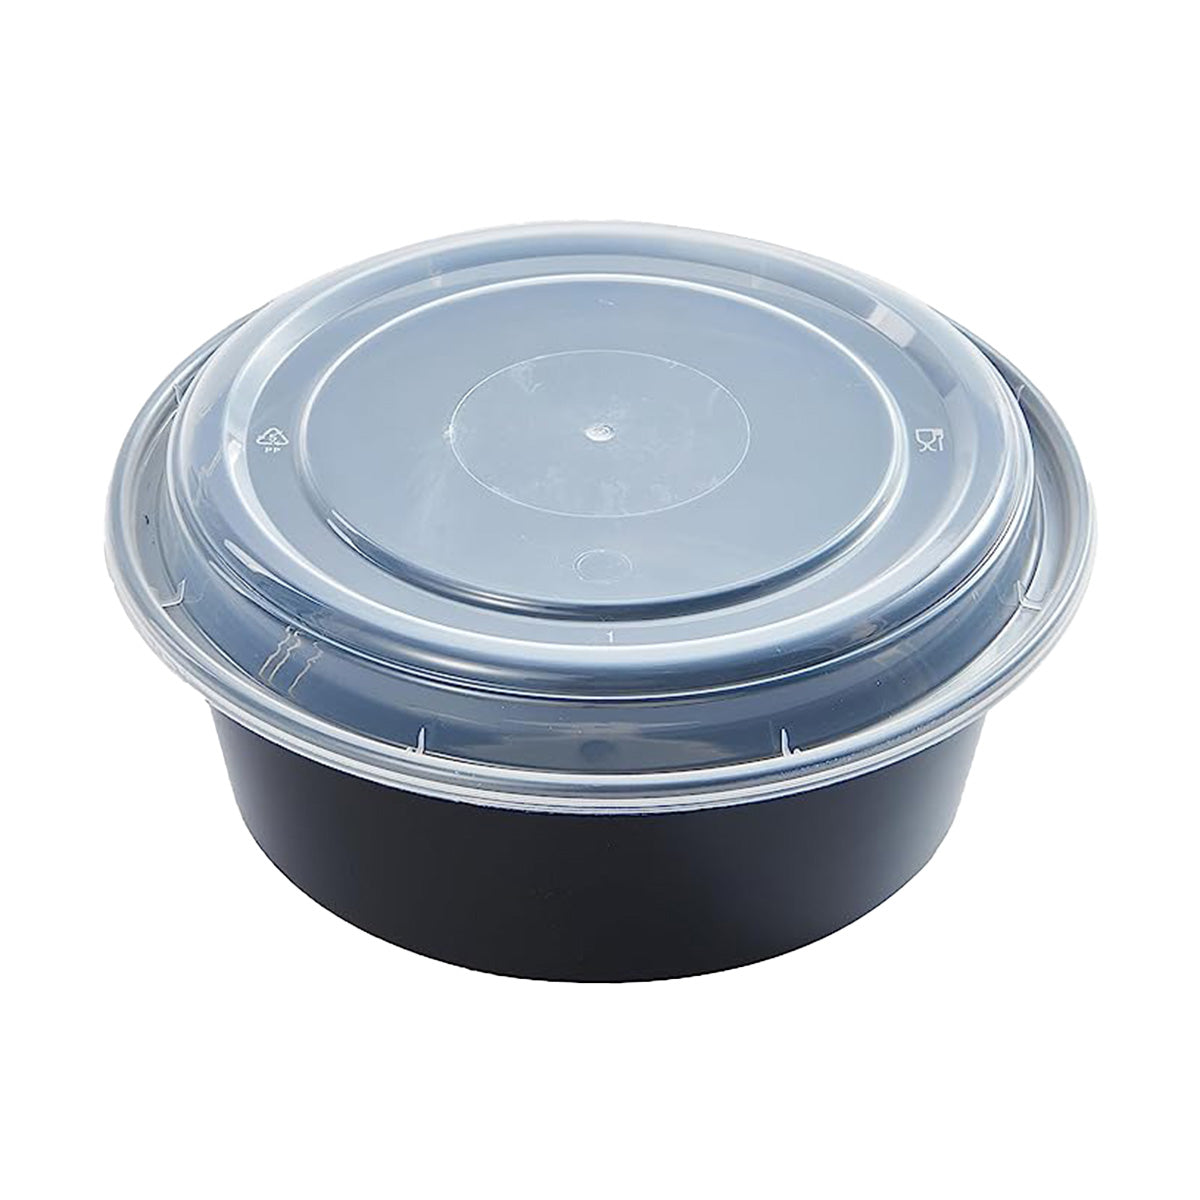 CIAO! 32oz Injection Molded Microwavable Black Round Food Container with Lid (150/case)